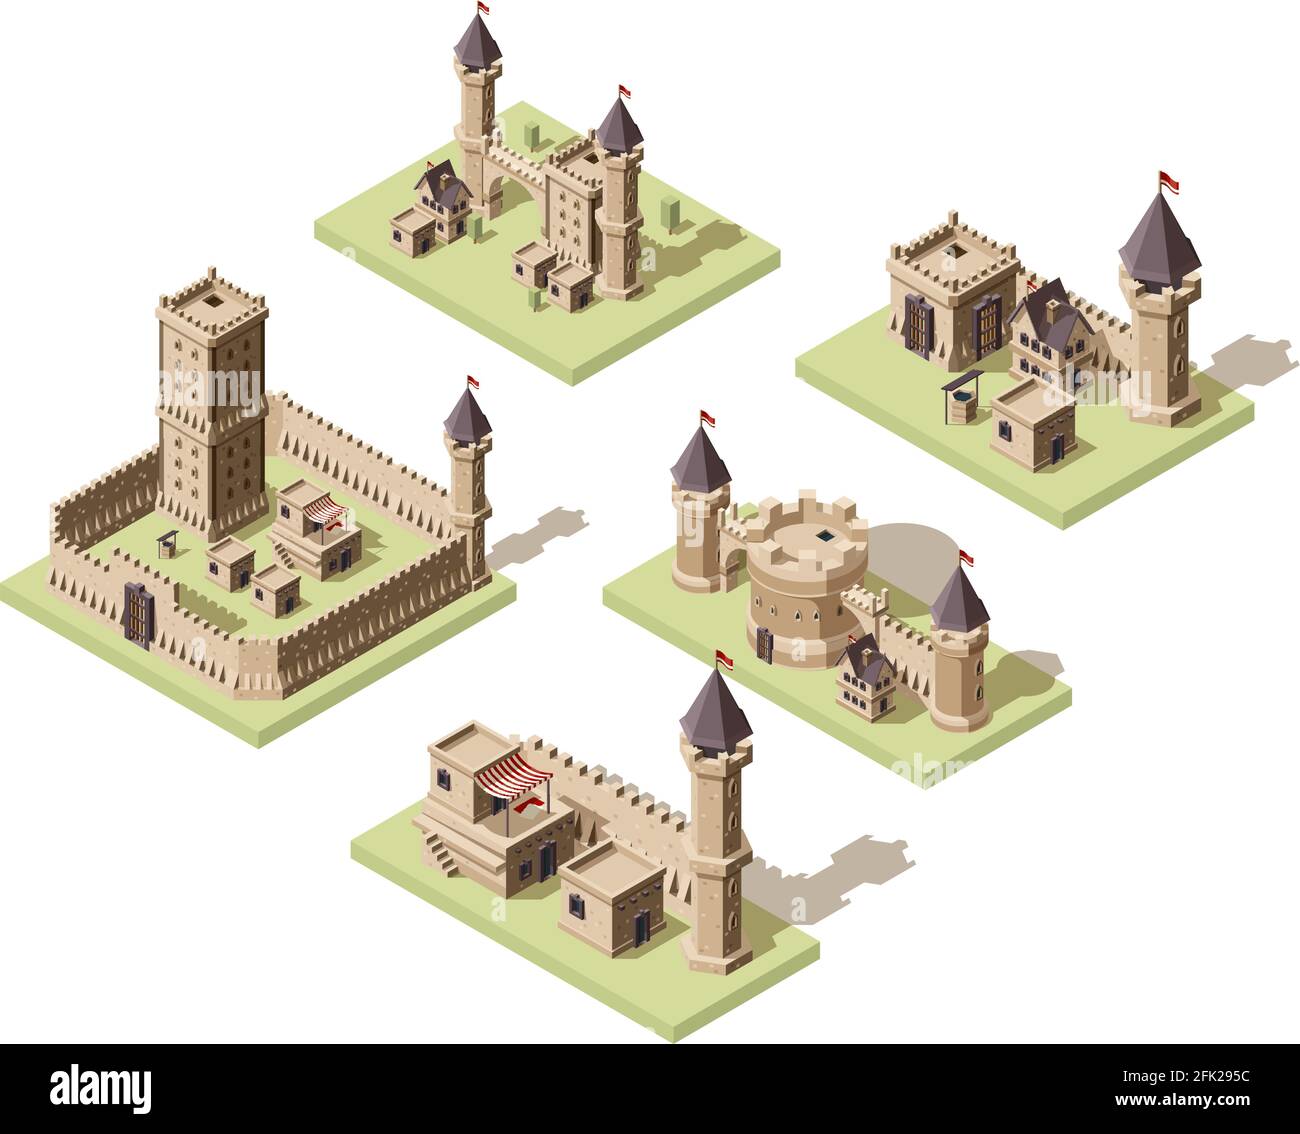 Castles low poly. Video game isometric assets medieval buildings from old rocks and bricks 3d houses vector old fort Stock Vector